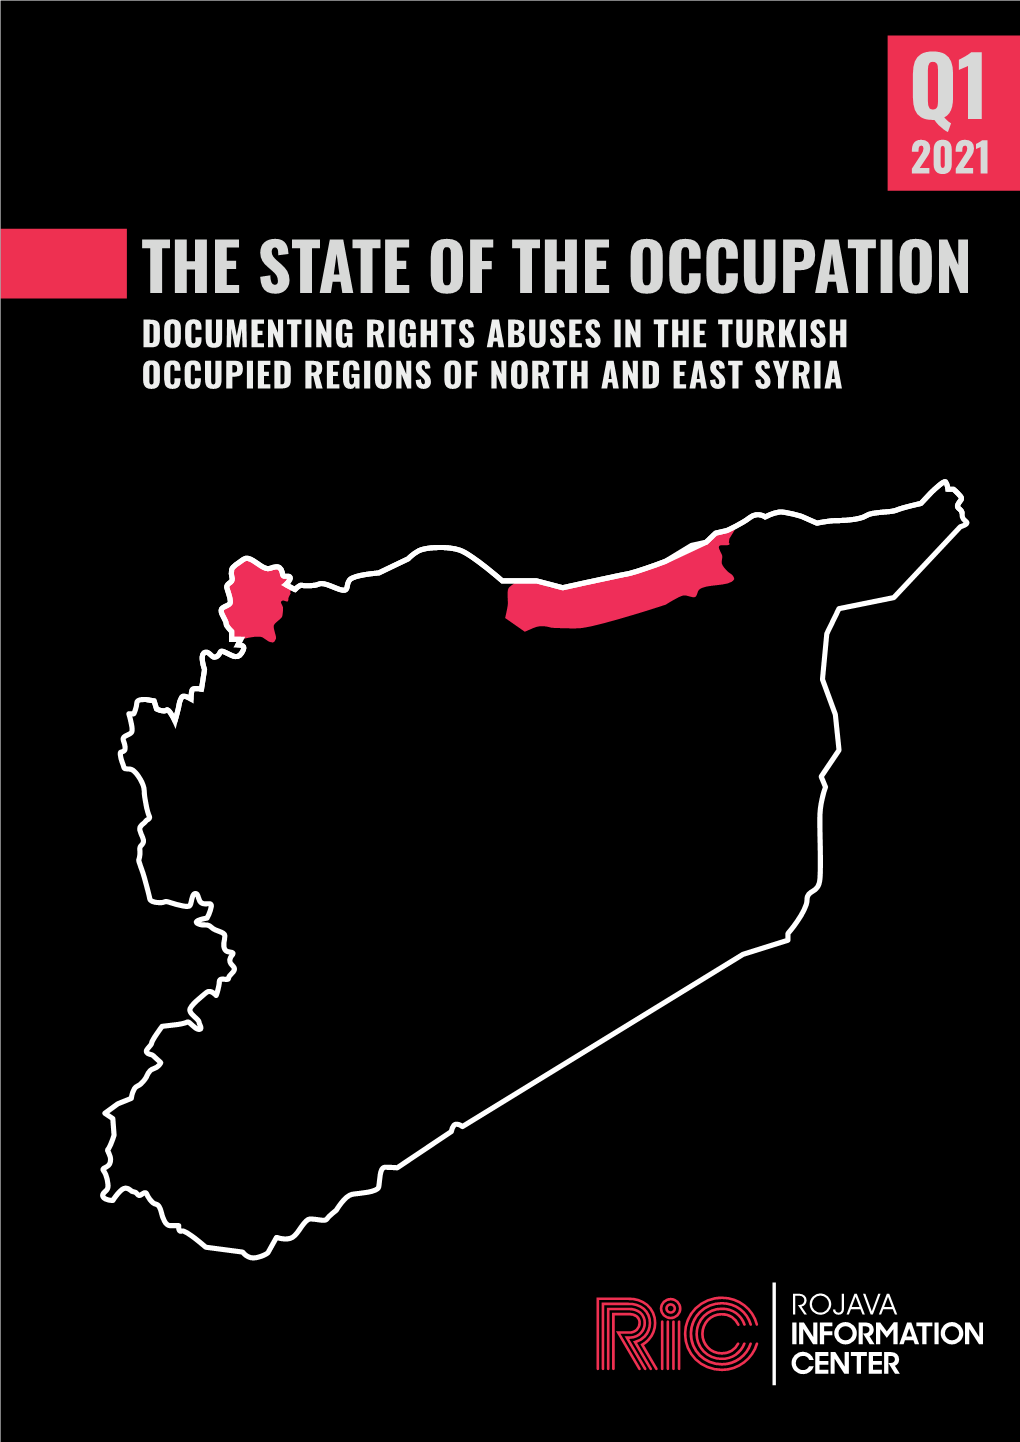 The State of the Occupation Documenting Rights Abuses in the Turkish Occupied Regions of North and East Syria